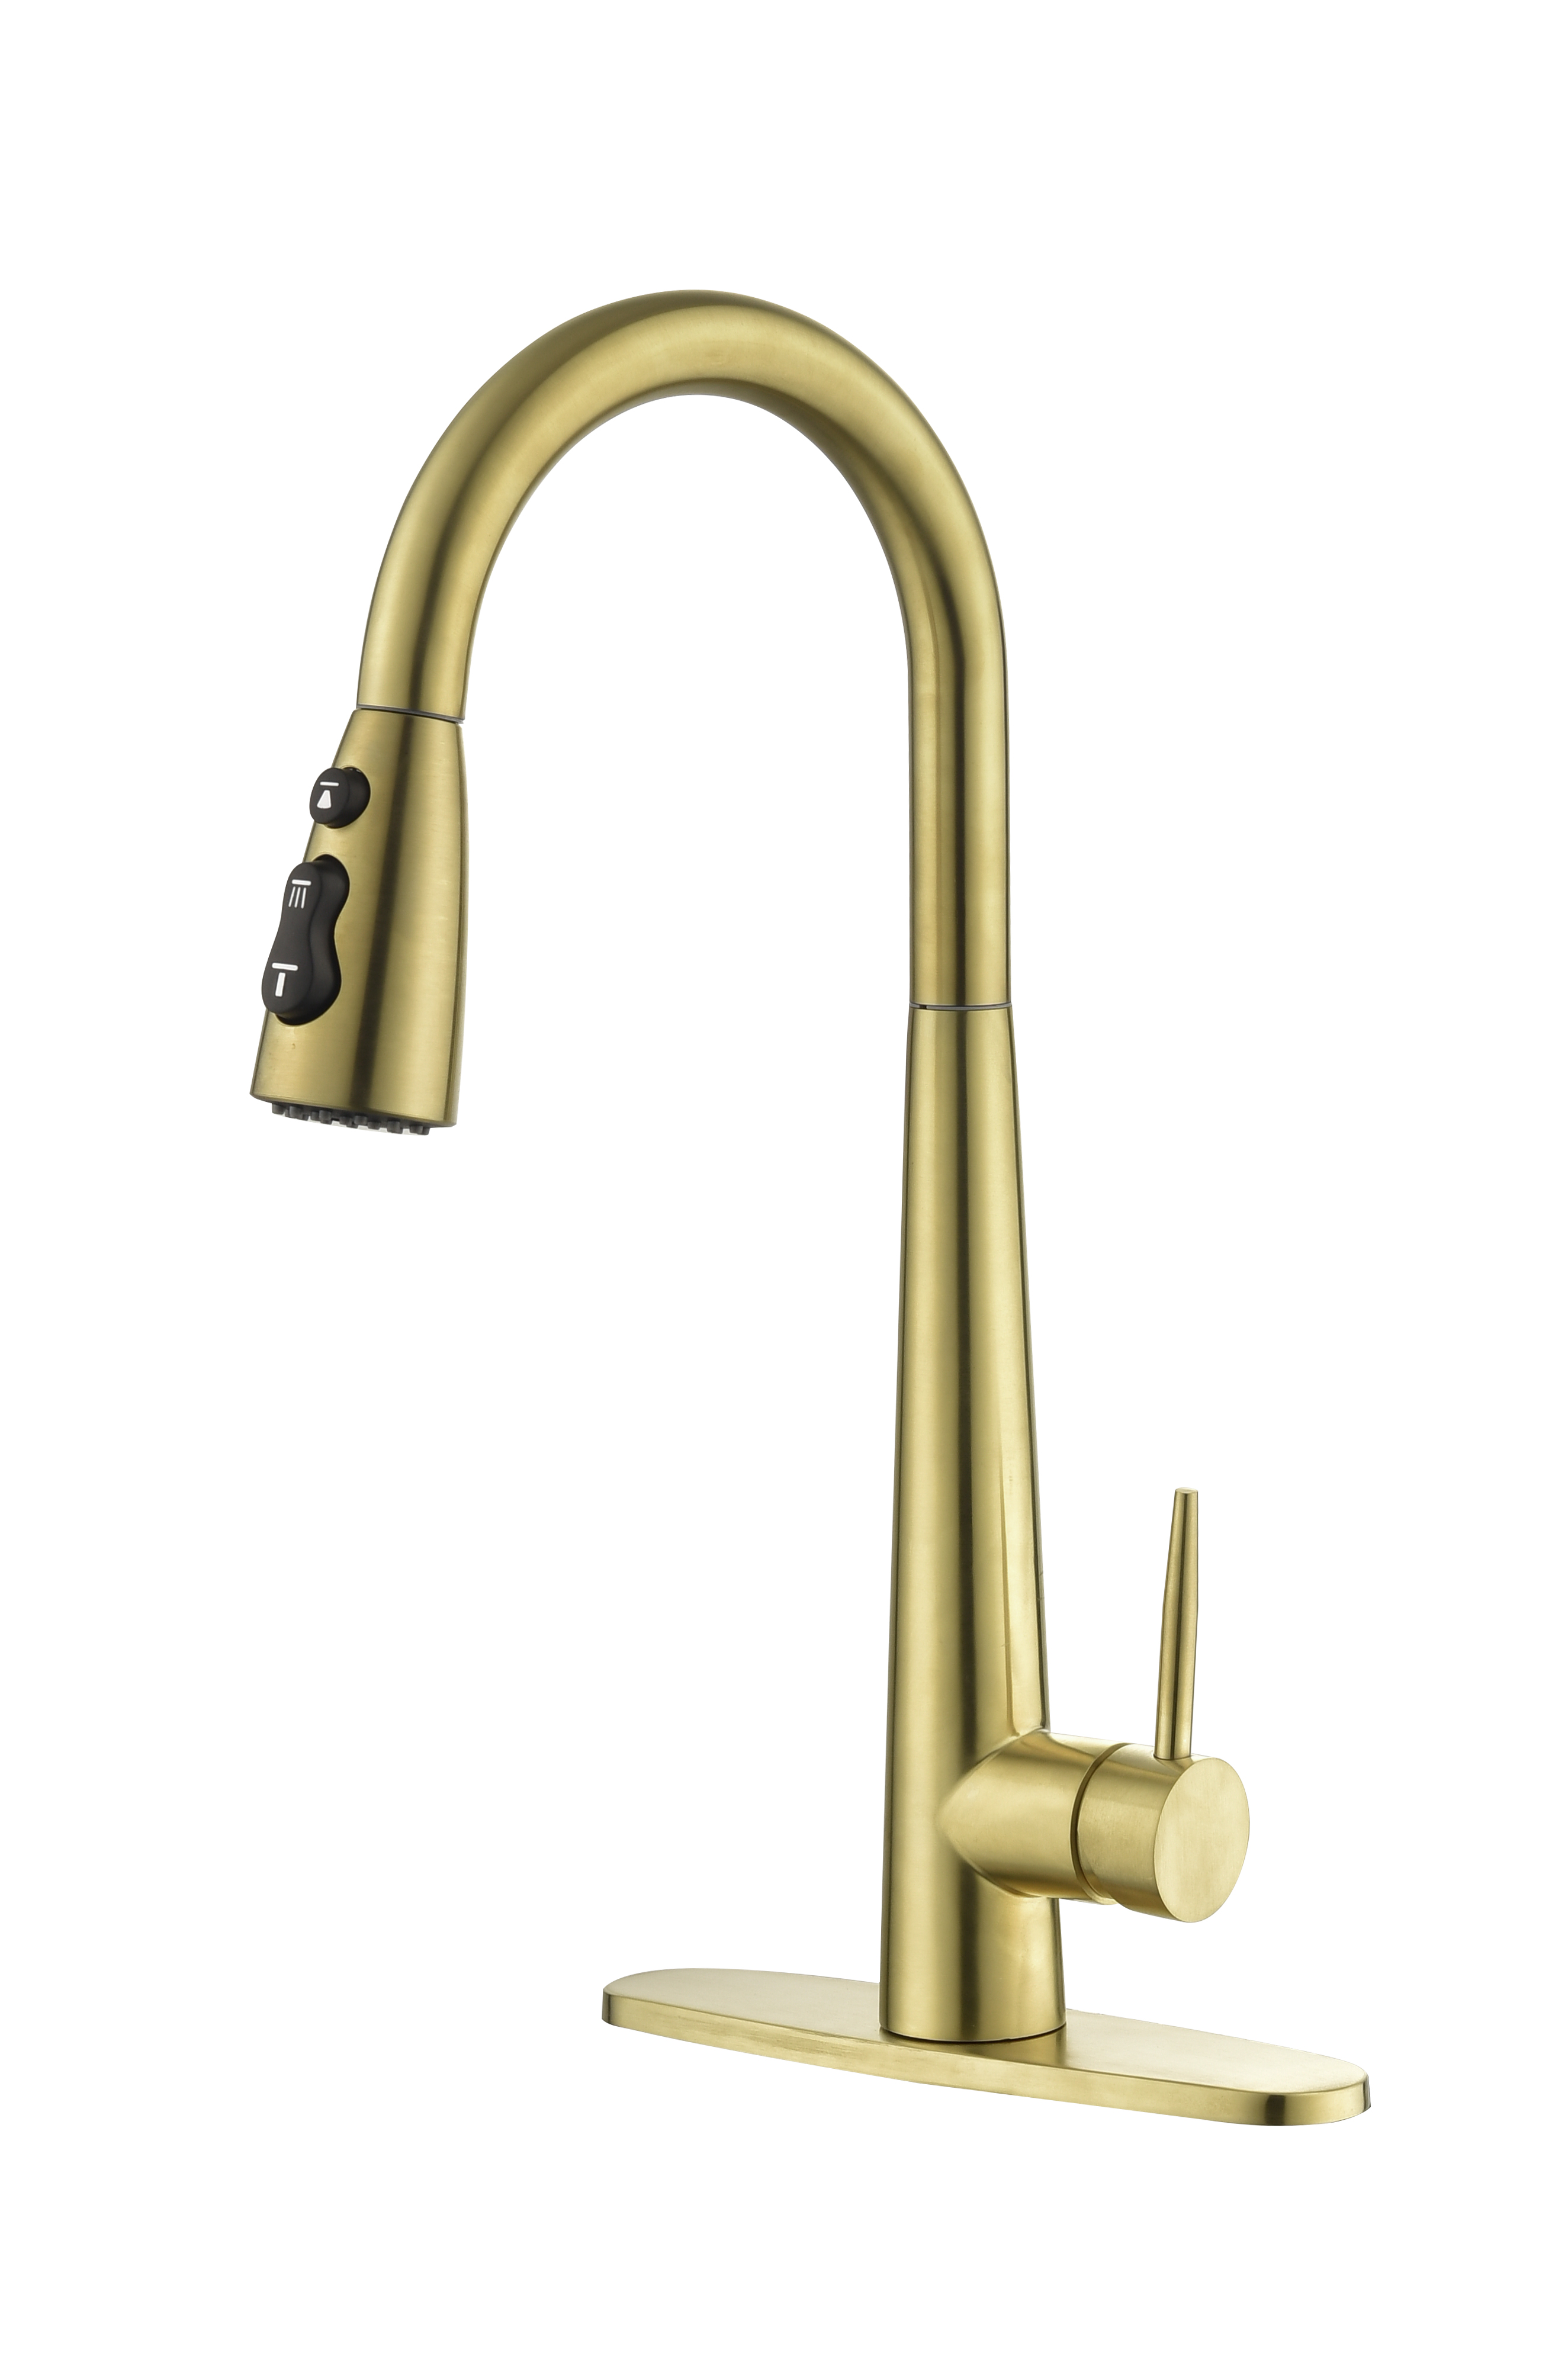 Gold Kitchen Faucets with Pull Down Sprayer, Kitchen Sink Faucet with Pull Out Sprayer, Fingerprint Resistant, Single Hole Deck Mount, Single Handle Copper Kitchen Faucet,-Boyel Living